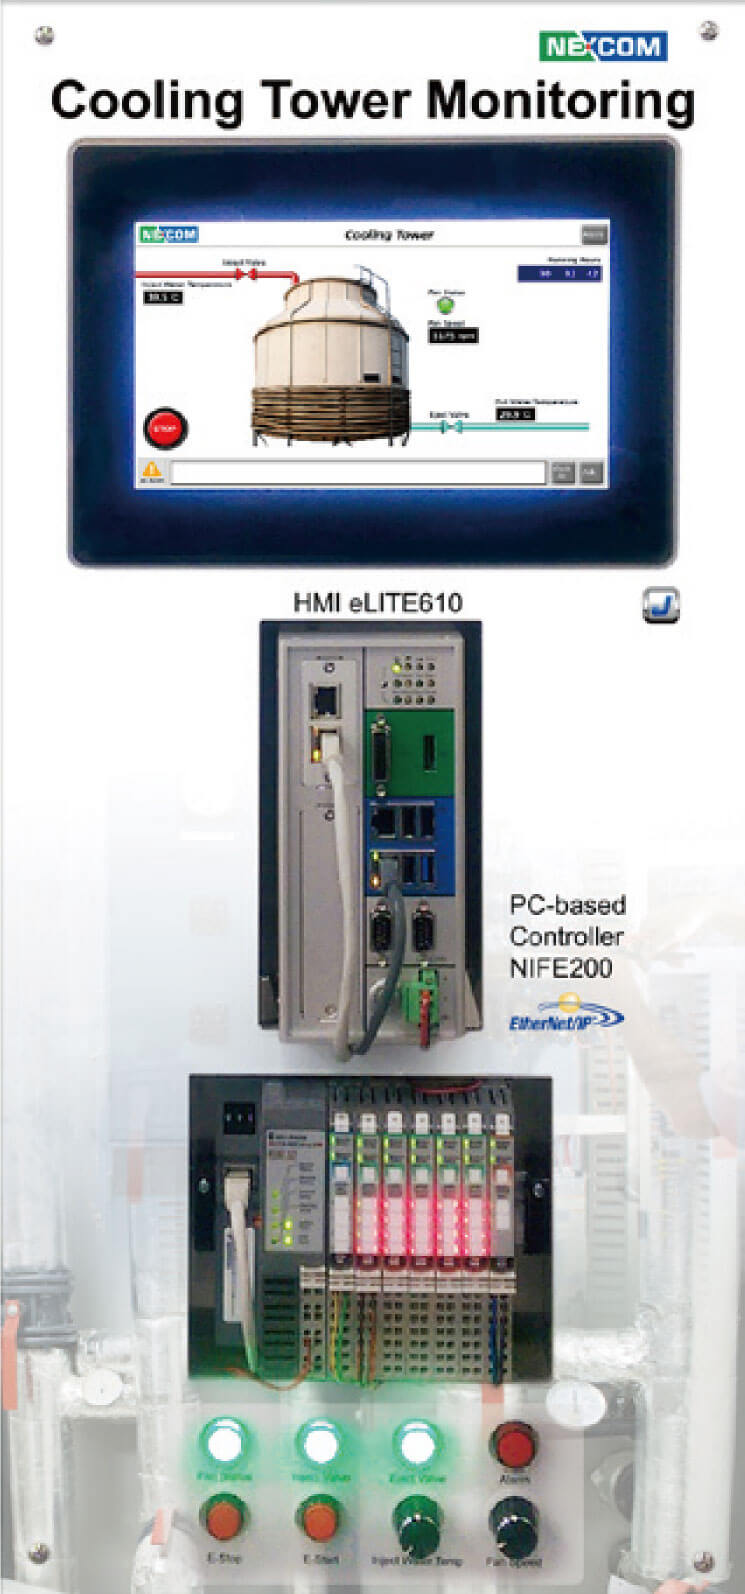 Multi-fieldbus communication PC-based controller with CODESYS RTE HMI with JMobile runtime included Scenario for power generator simulation with 4 indicators, 2 push button and 2 knobs